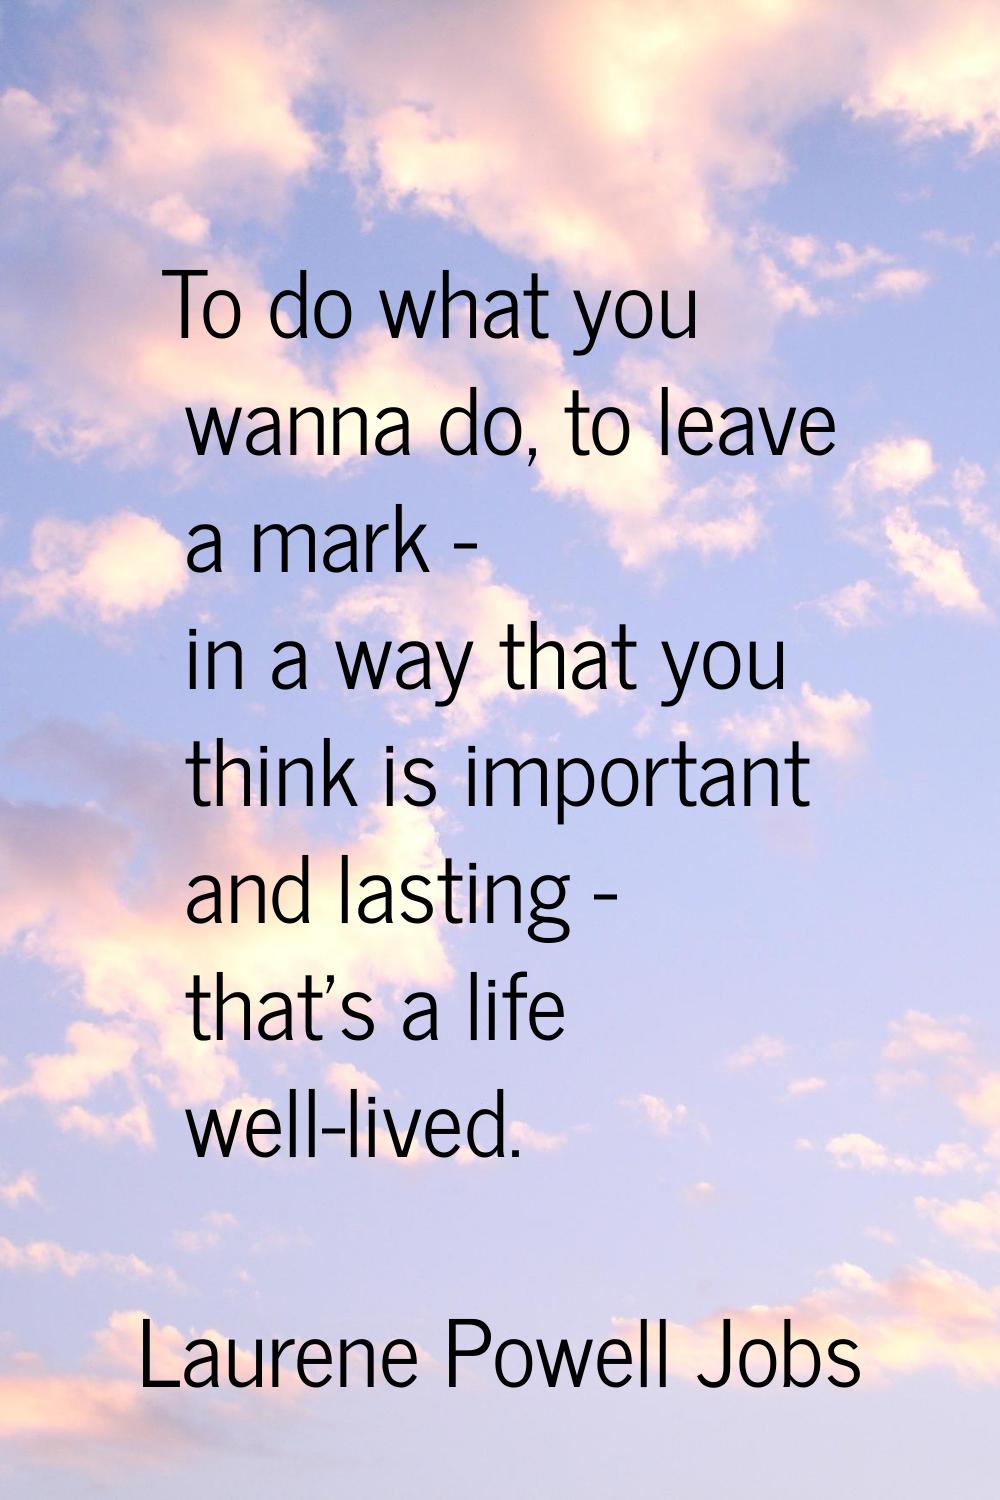 To do what you wanna do, to leave a mark - in a way that you think is important and lasting - that'